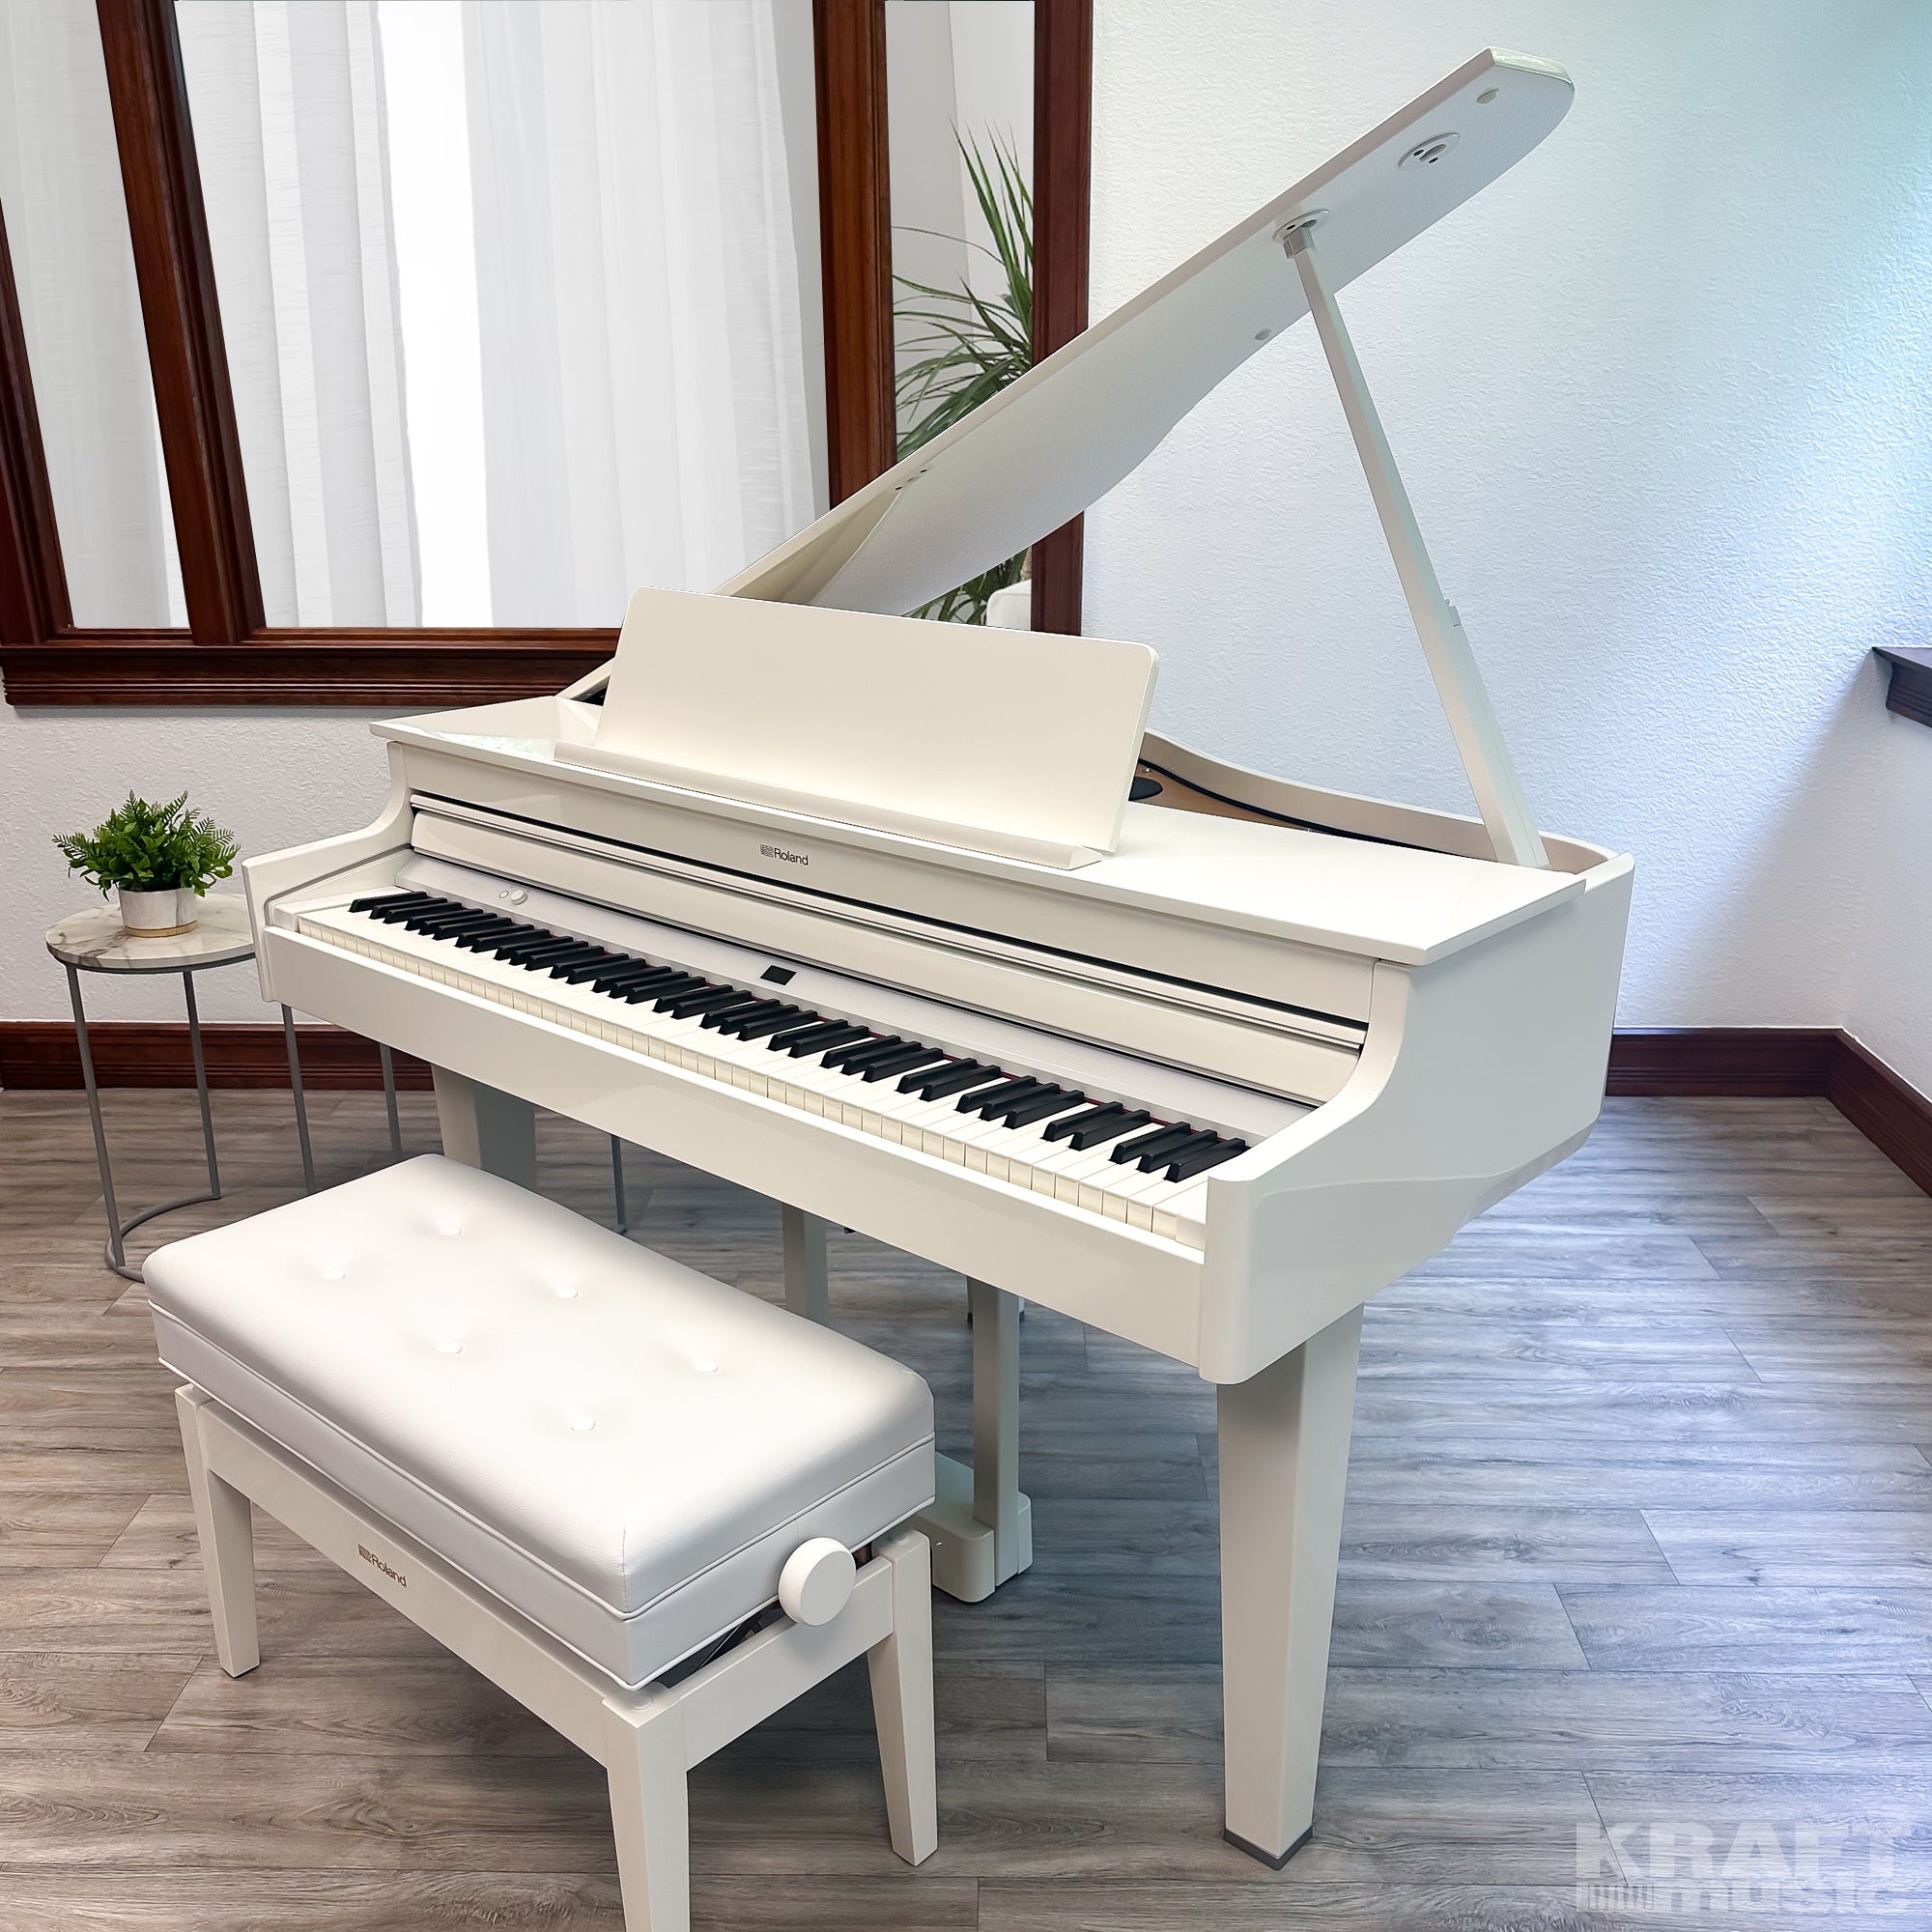 Roland GP-6 in a stylish music room